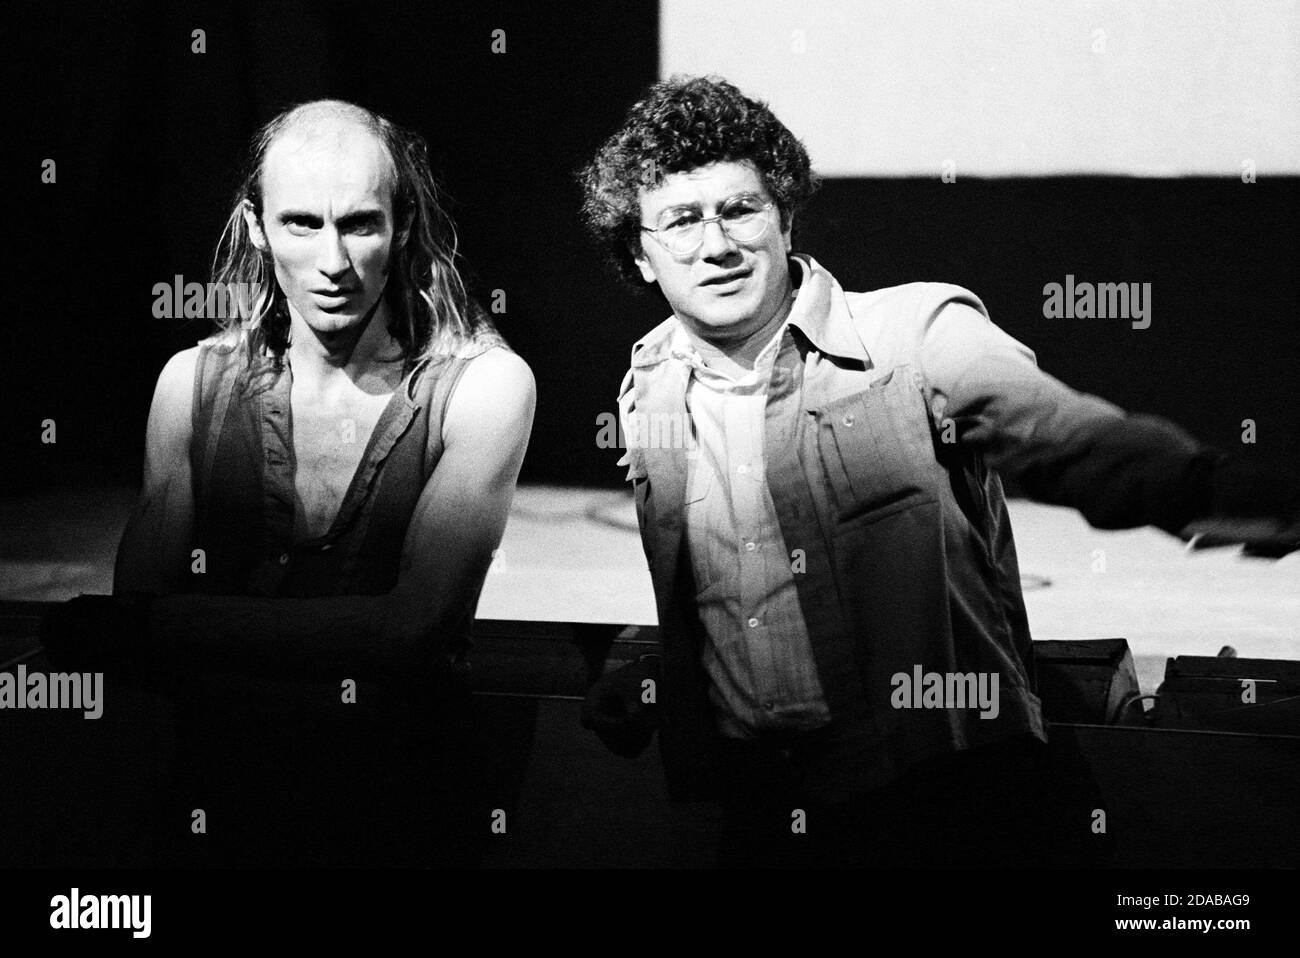 l-r: Richard O'Brien (Riff Raff / author), Michael White (producer / impressario) at a dress rehearsal of THE ROCKY HORROR SHOW at the Chelsea Classic Cinema, London SW3 14/08/1973  transfer from the the Theatre Upstairs, Royal Court Theatre  book, music & lyrics by Richard O'Brien  set design: Brian Thomson  costumes: Sue Blane  lighting: Gerry Jenkinson  director: Jim Sharman Stock Photo